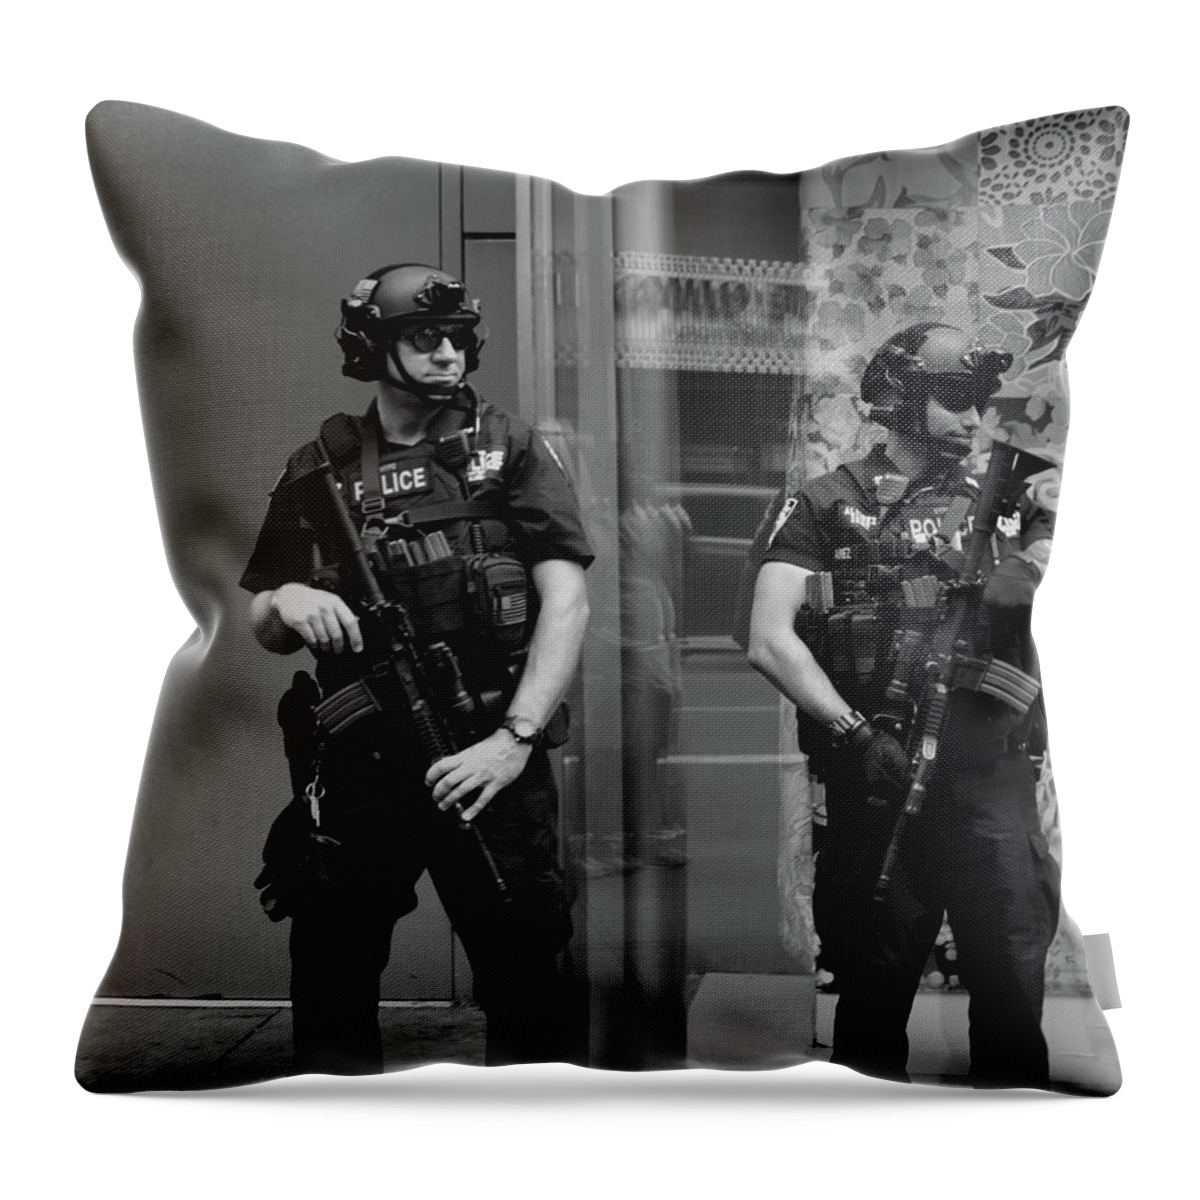 Town Throw Pillow featuring the photograph Police with big guns by Montez Kerr